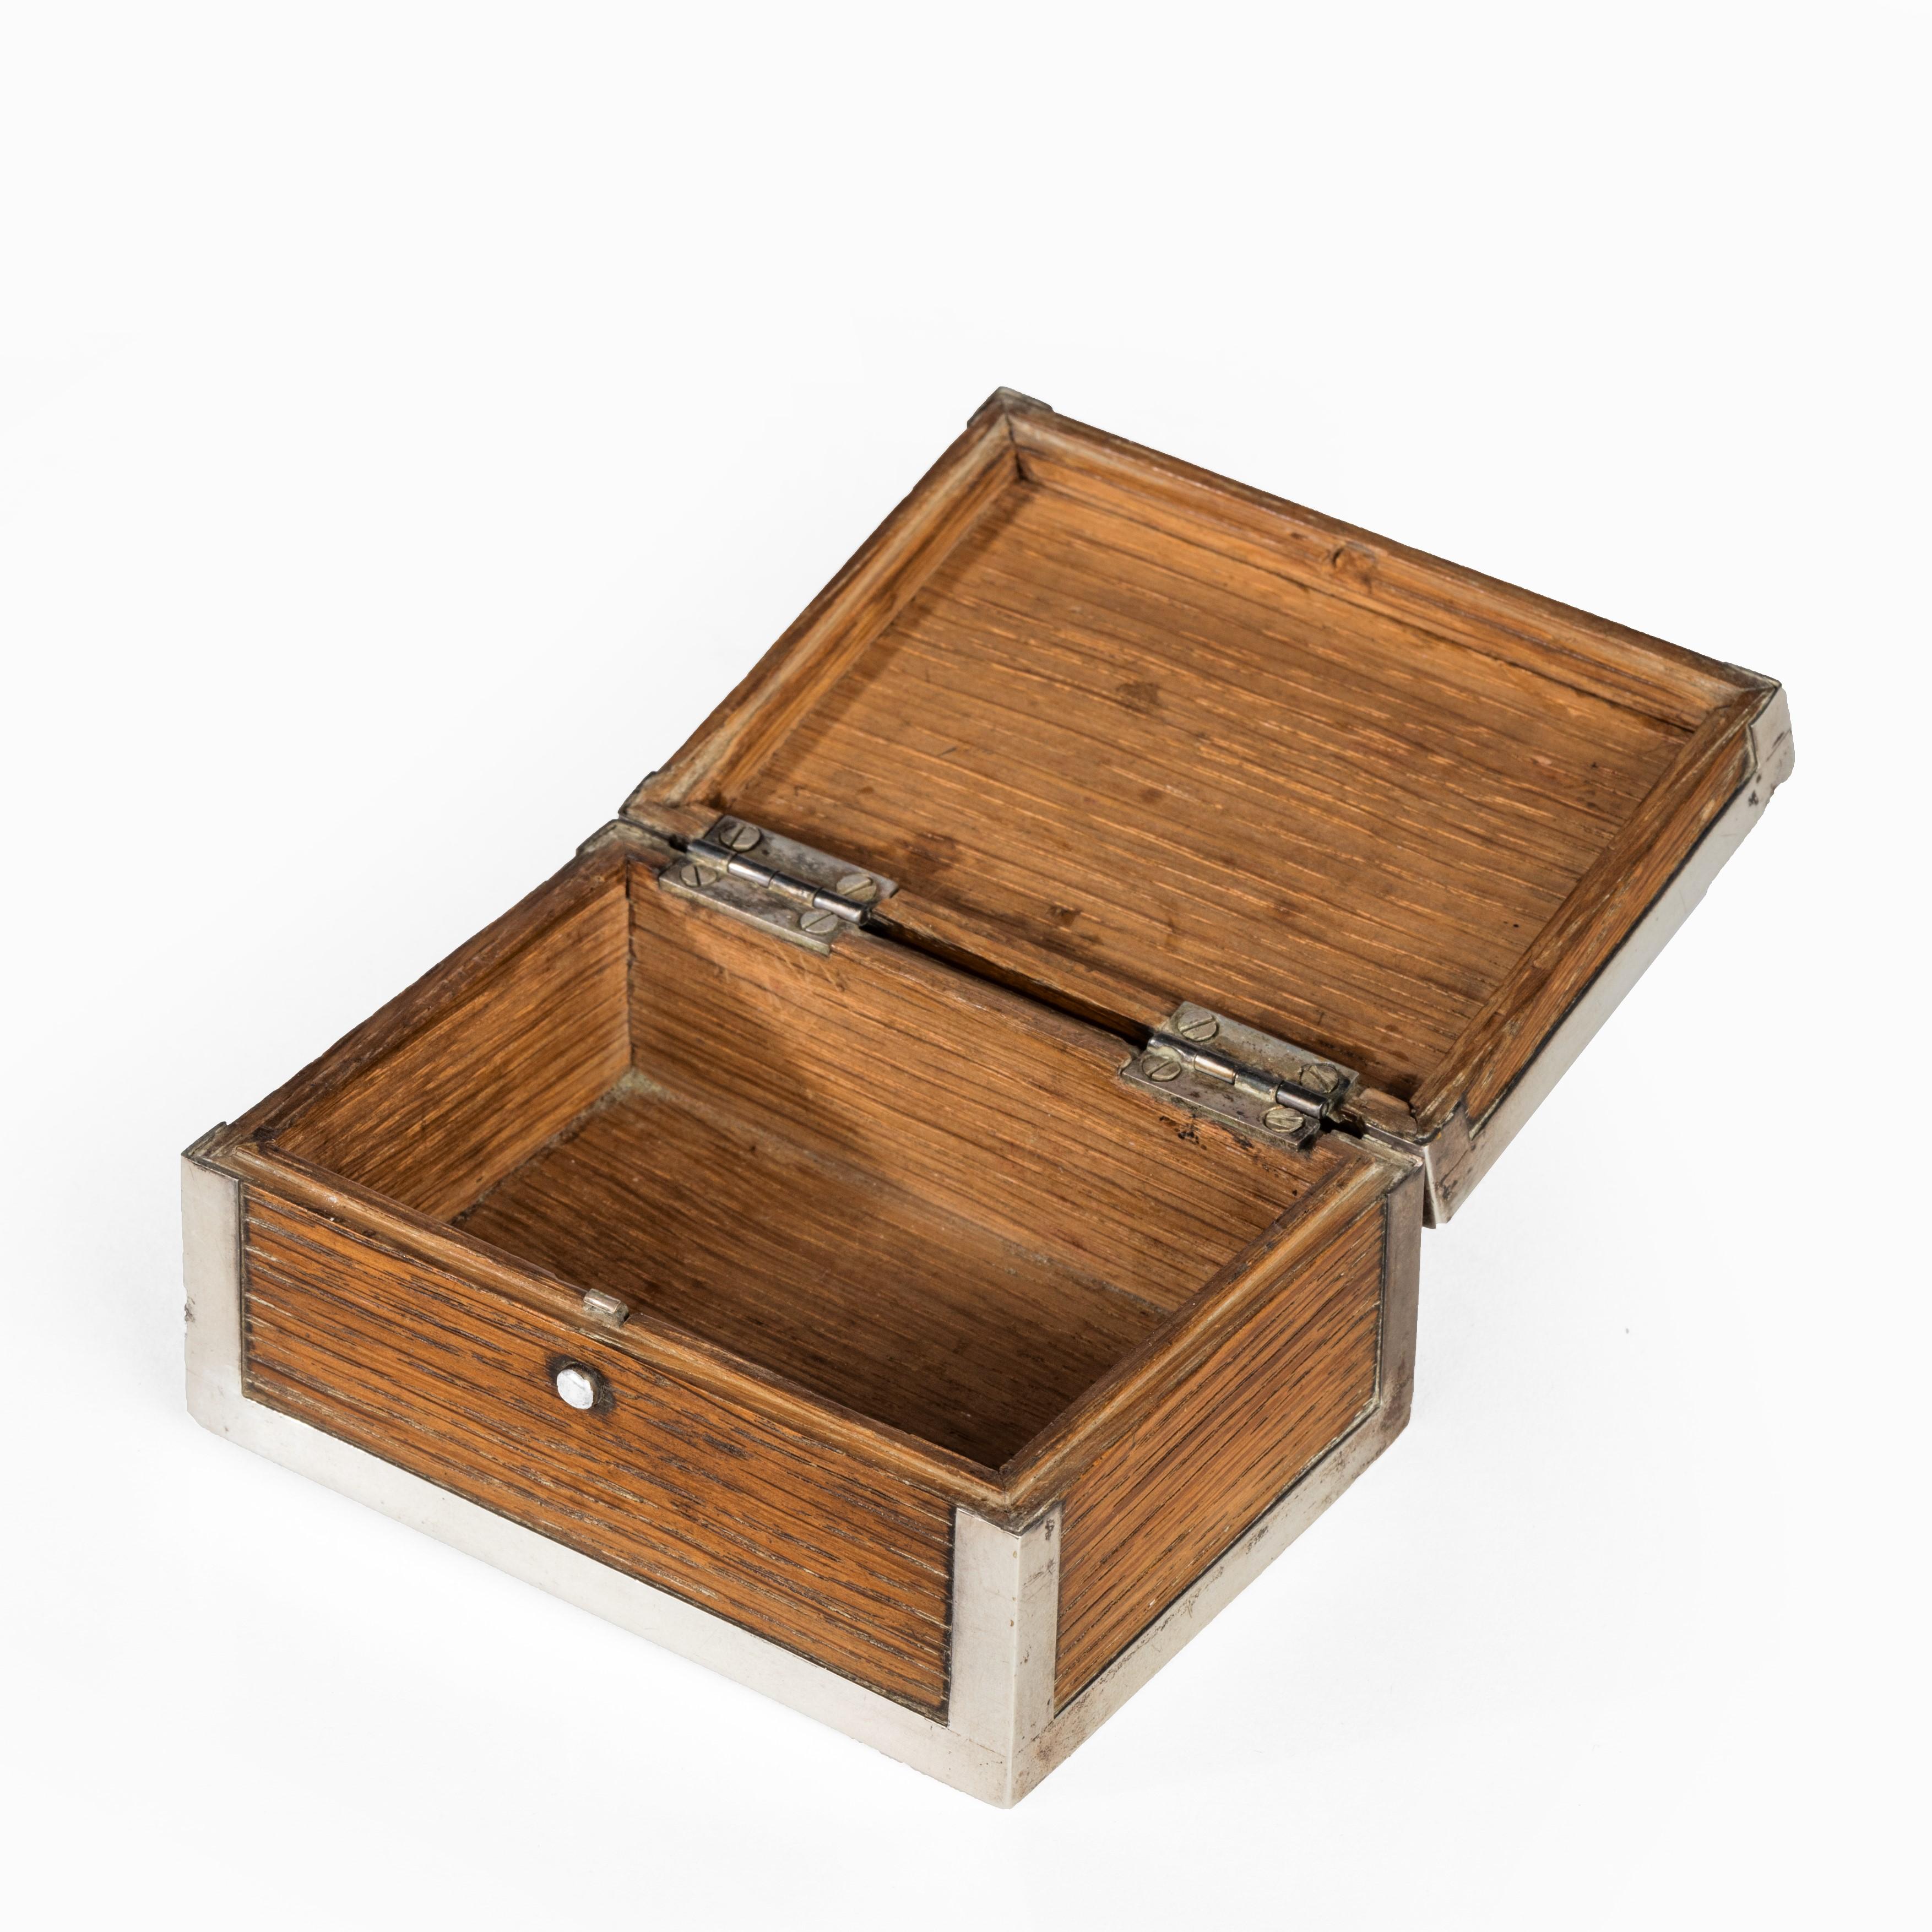 Hong Kong Silver Mounted Oak Box from the Ship's Timbers of Hms Victor Emmanuel